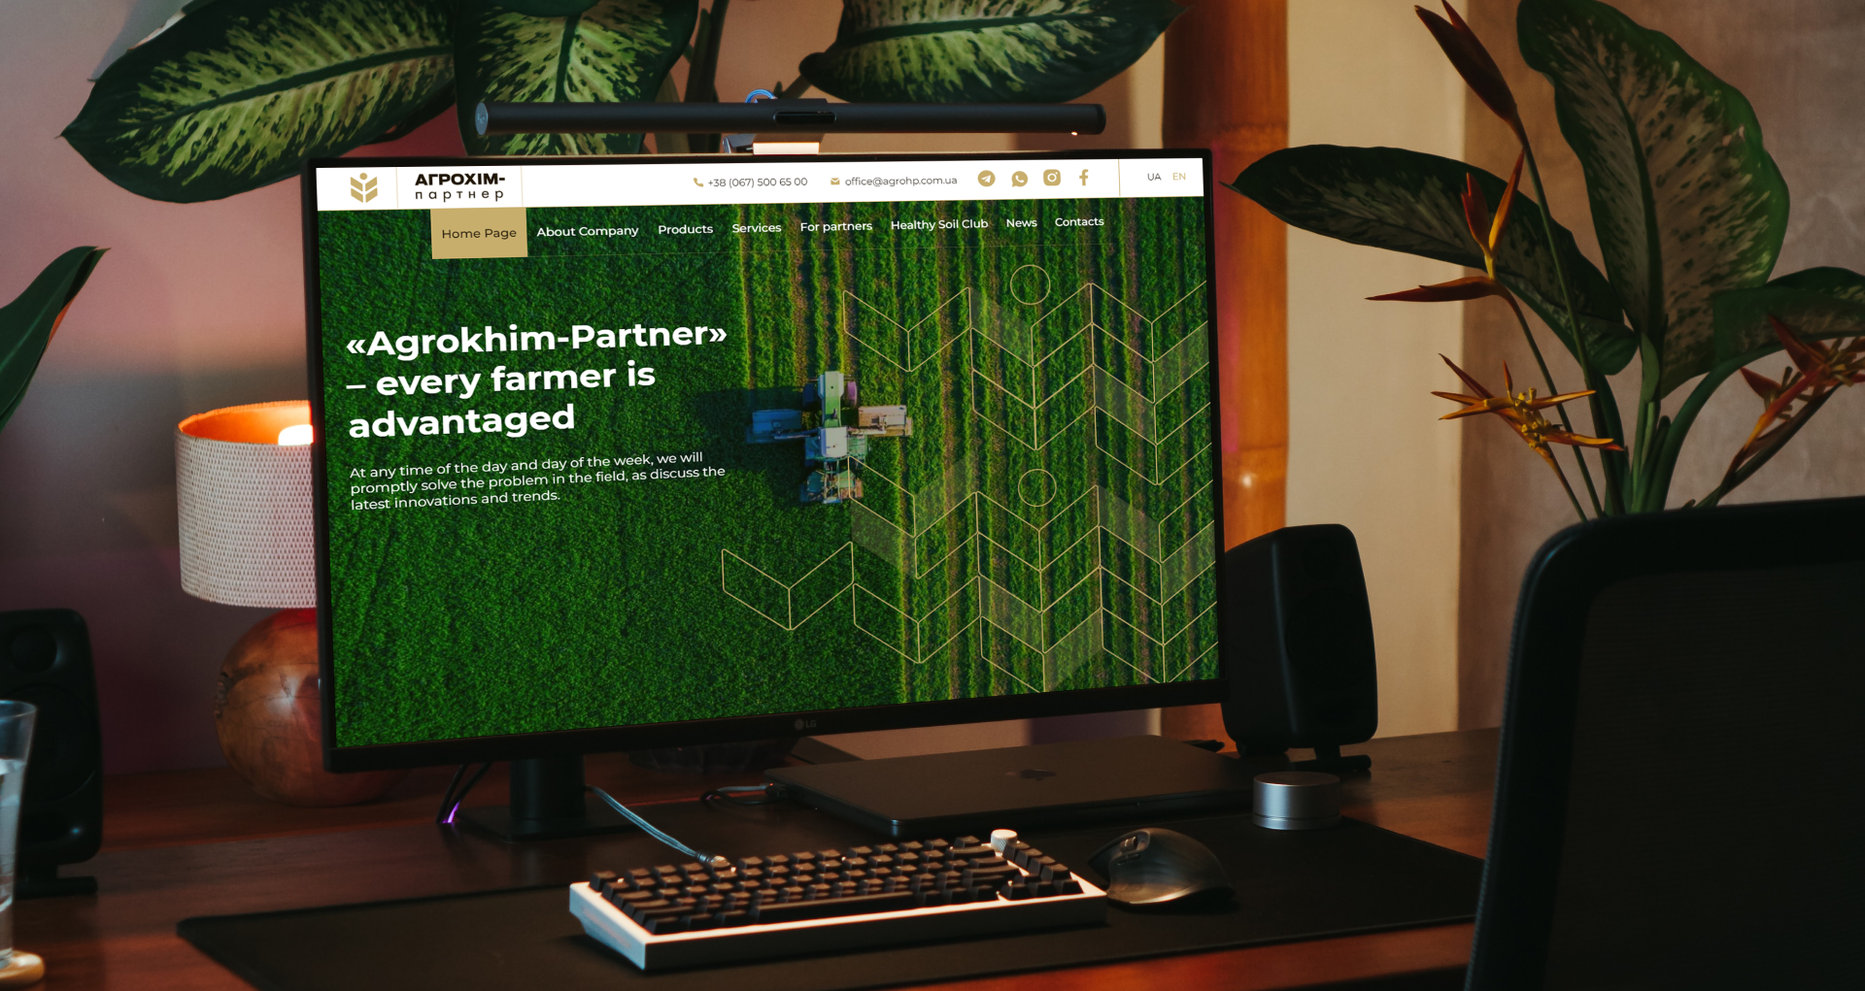 Rebranding of the agricultural company “Agrokhim-Partner”: communication strategy, logo, pattern, corporate style, and website — Rubarb - Image - 19